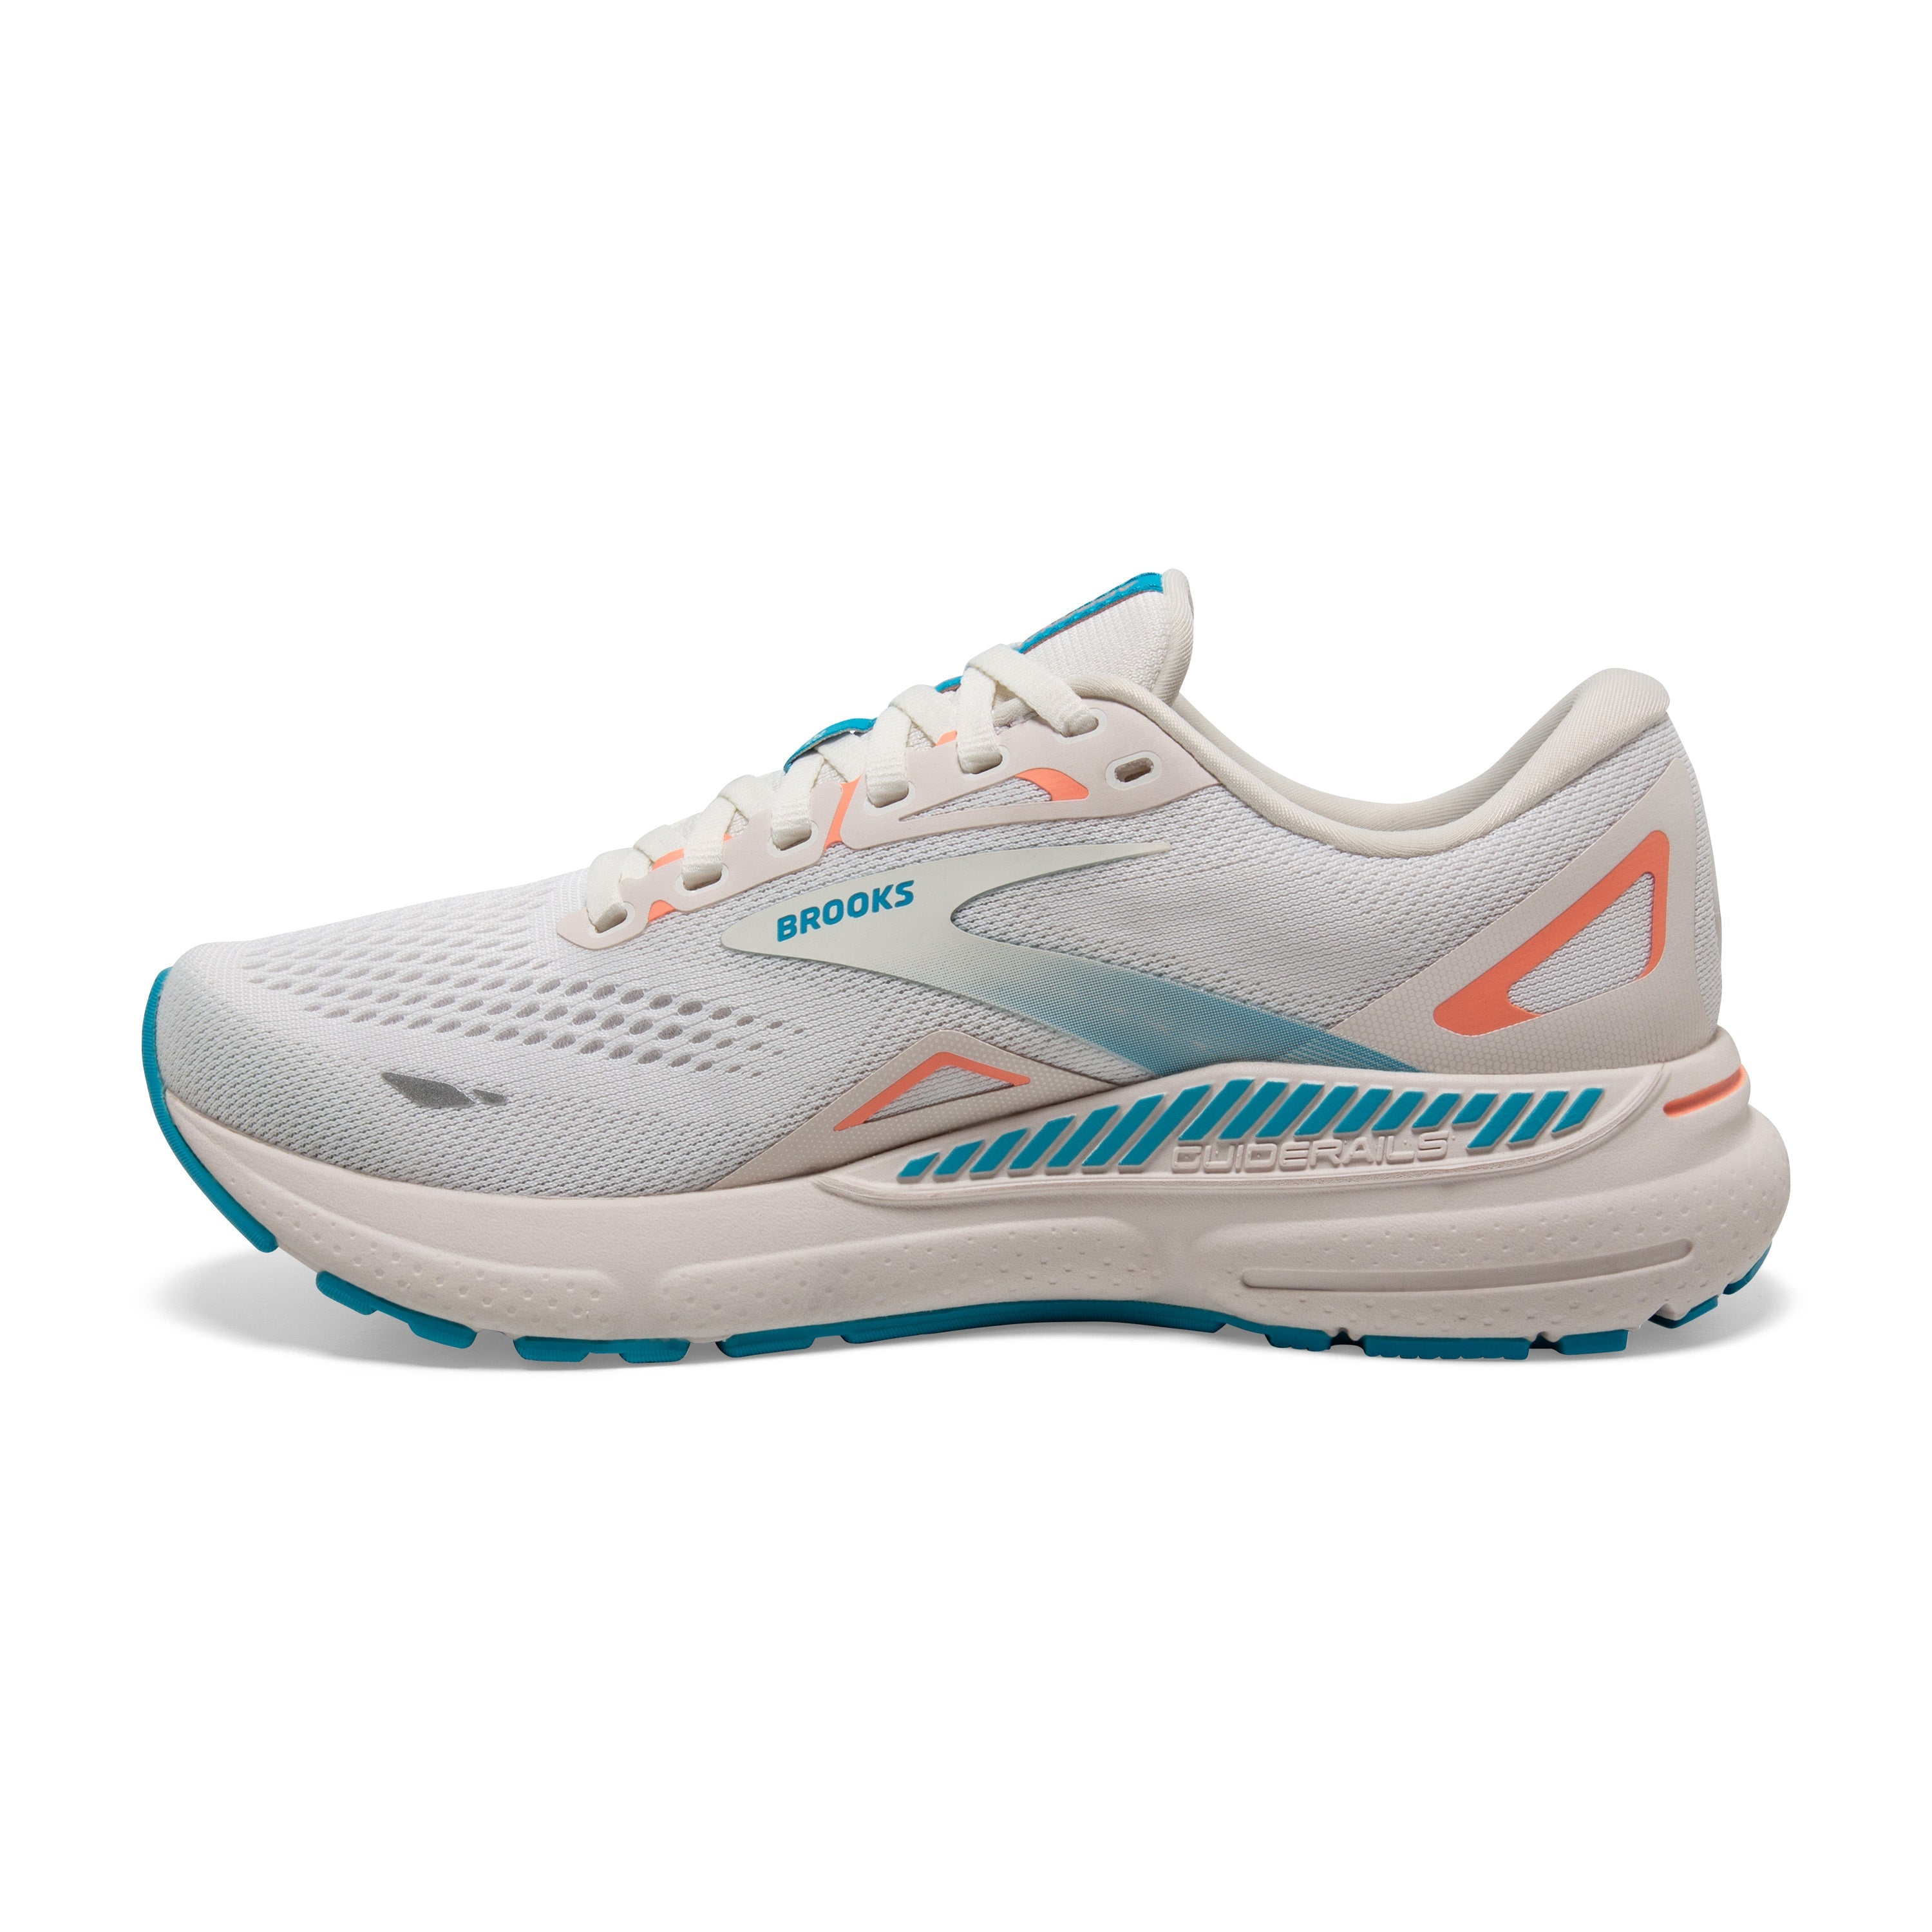 Score the Brooks Ghost 14 Sneaker 36% off on